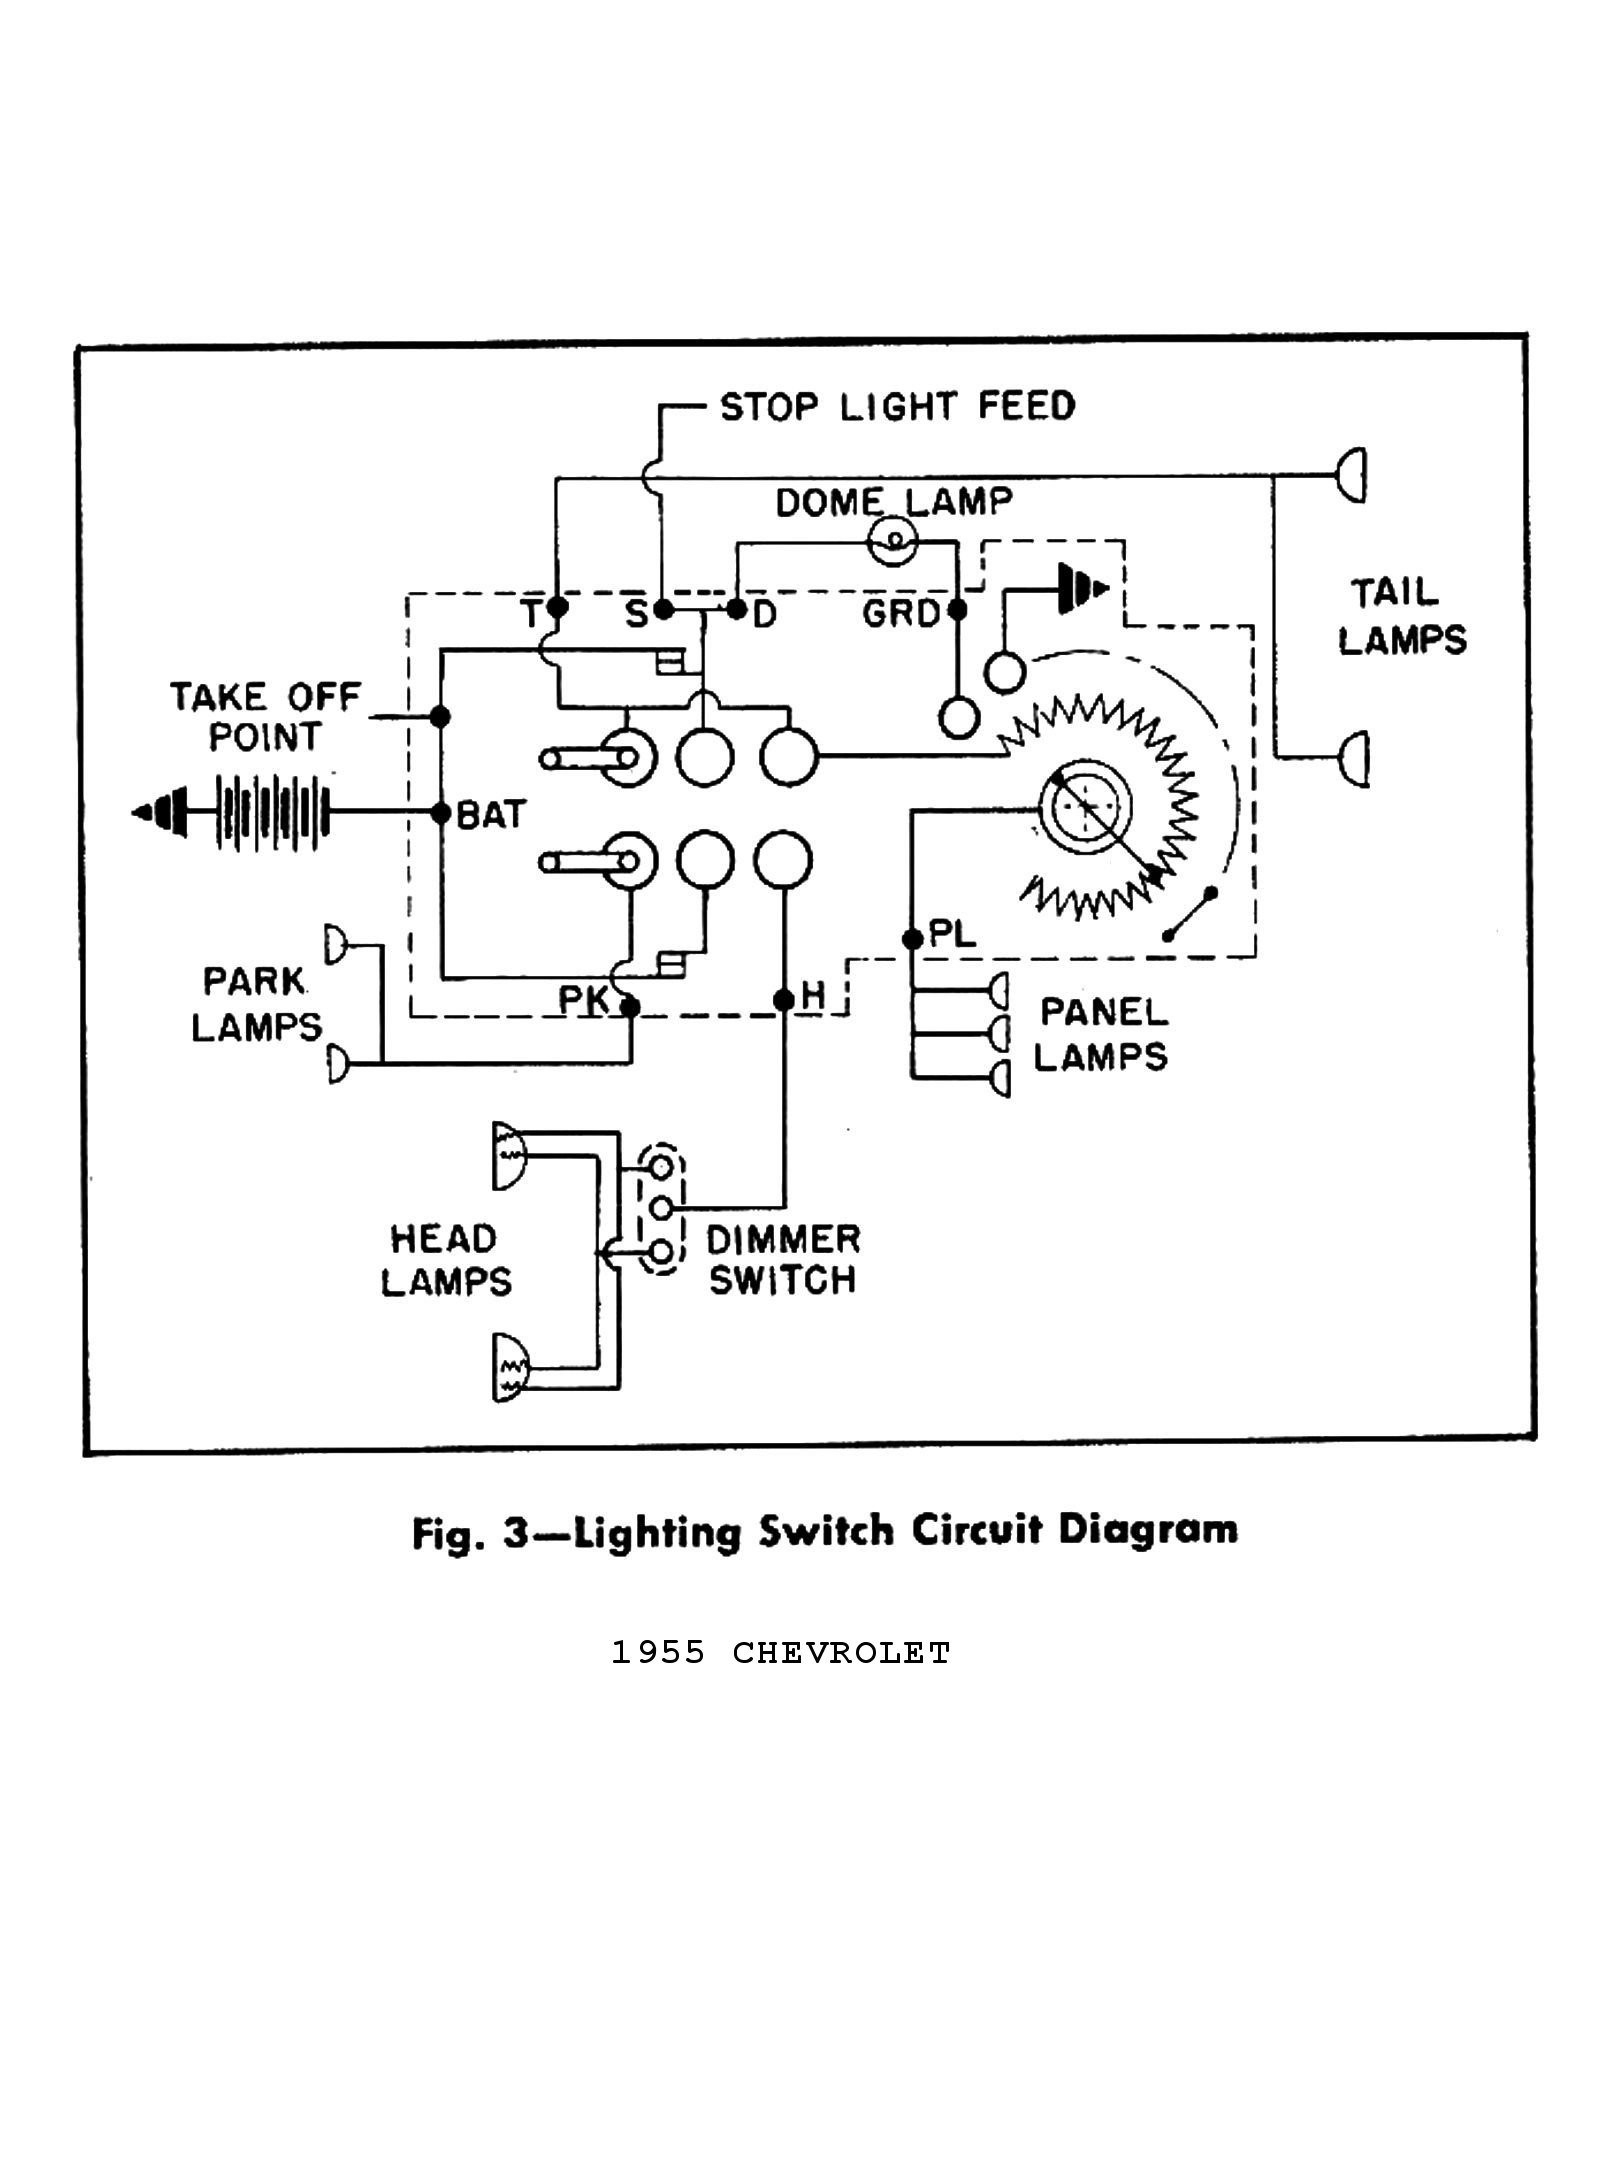 2910 Ford Tractor Wiring Diagram | Wiring Library - 8N Ford Tractor Wiring Diagram 12 Volt